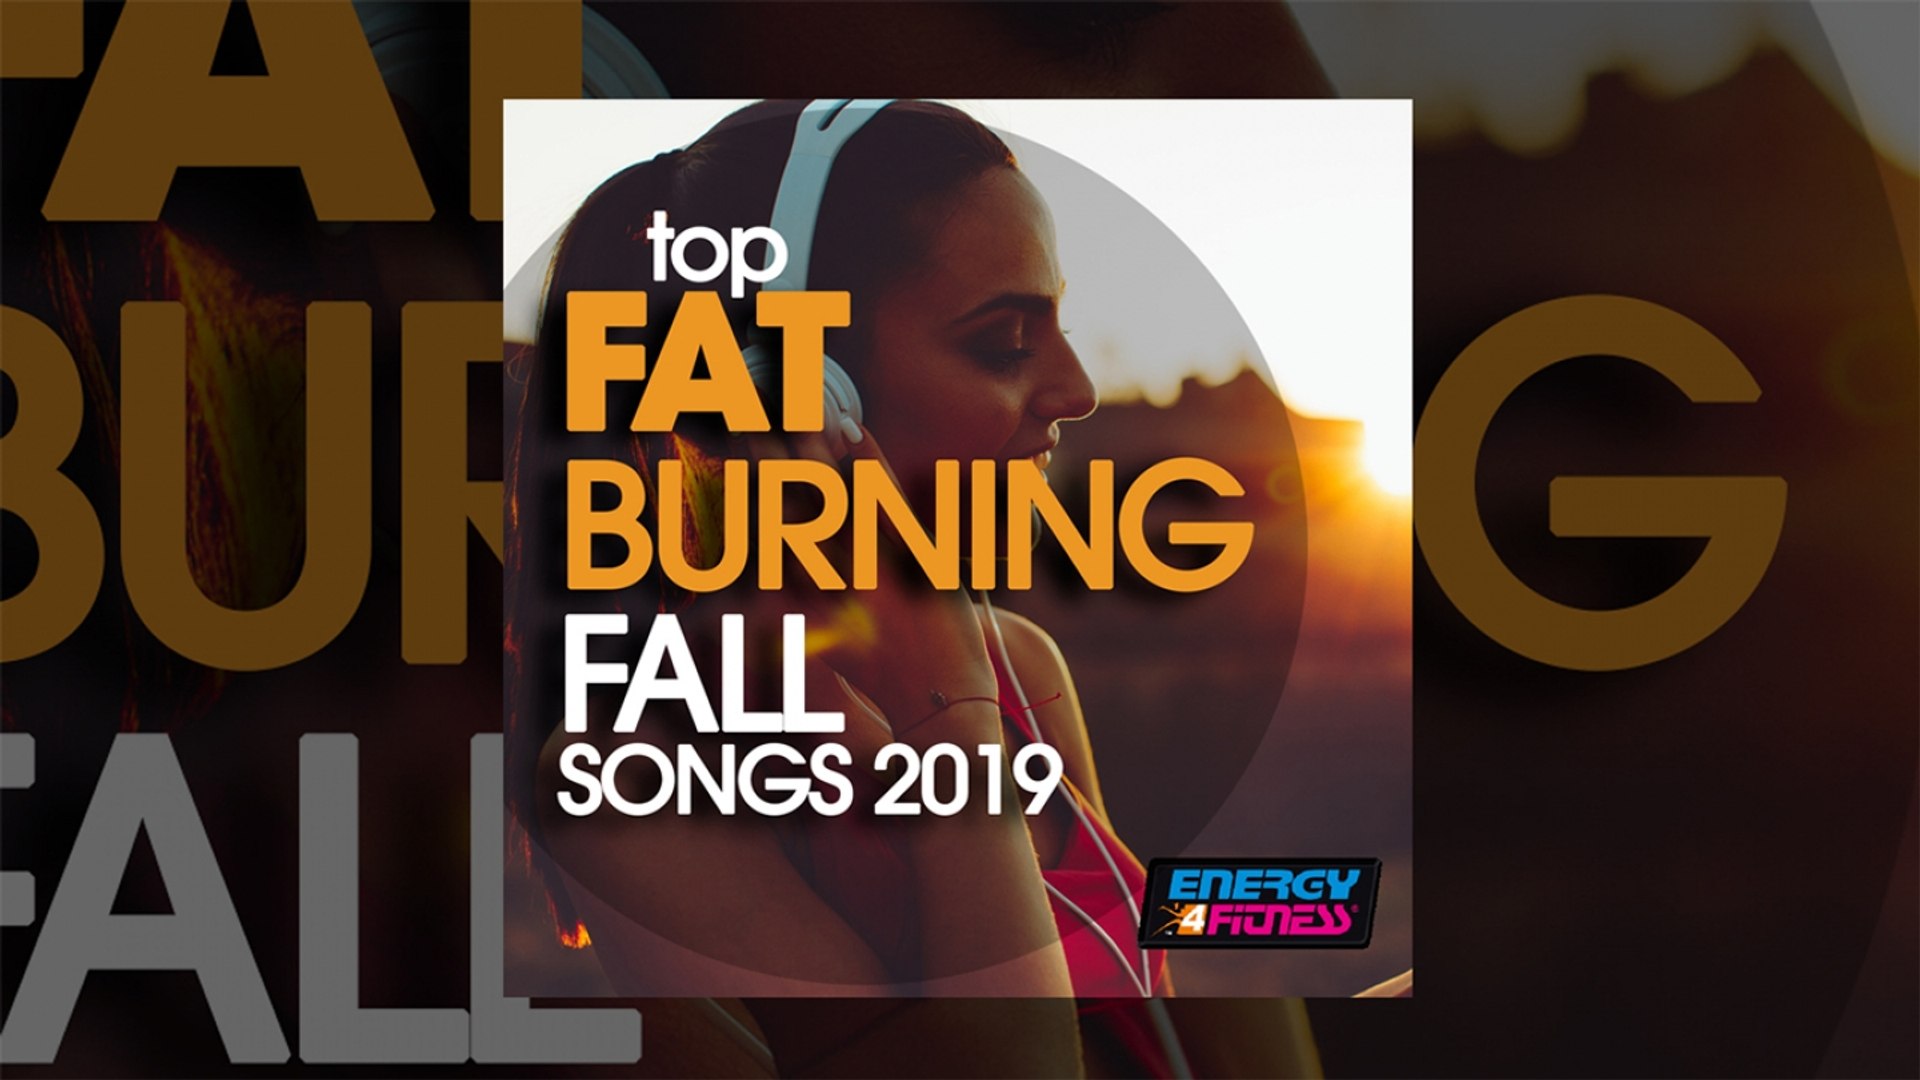 E4F - Top Fat Burning Fall Songs 2019 - Fitness & Music 2019